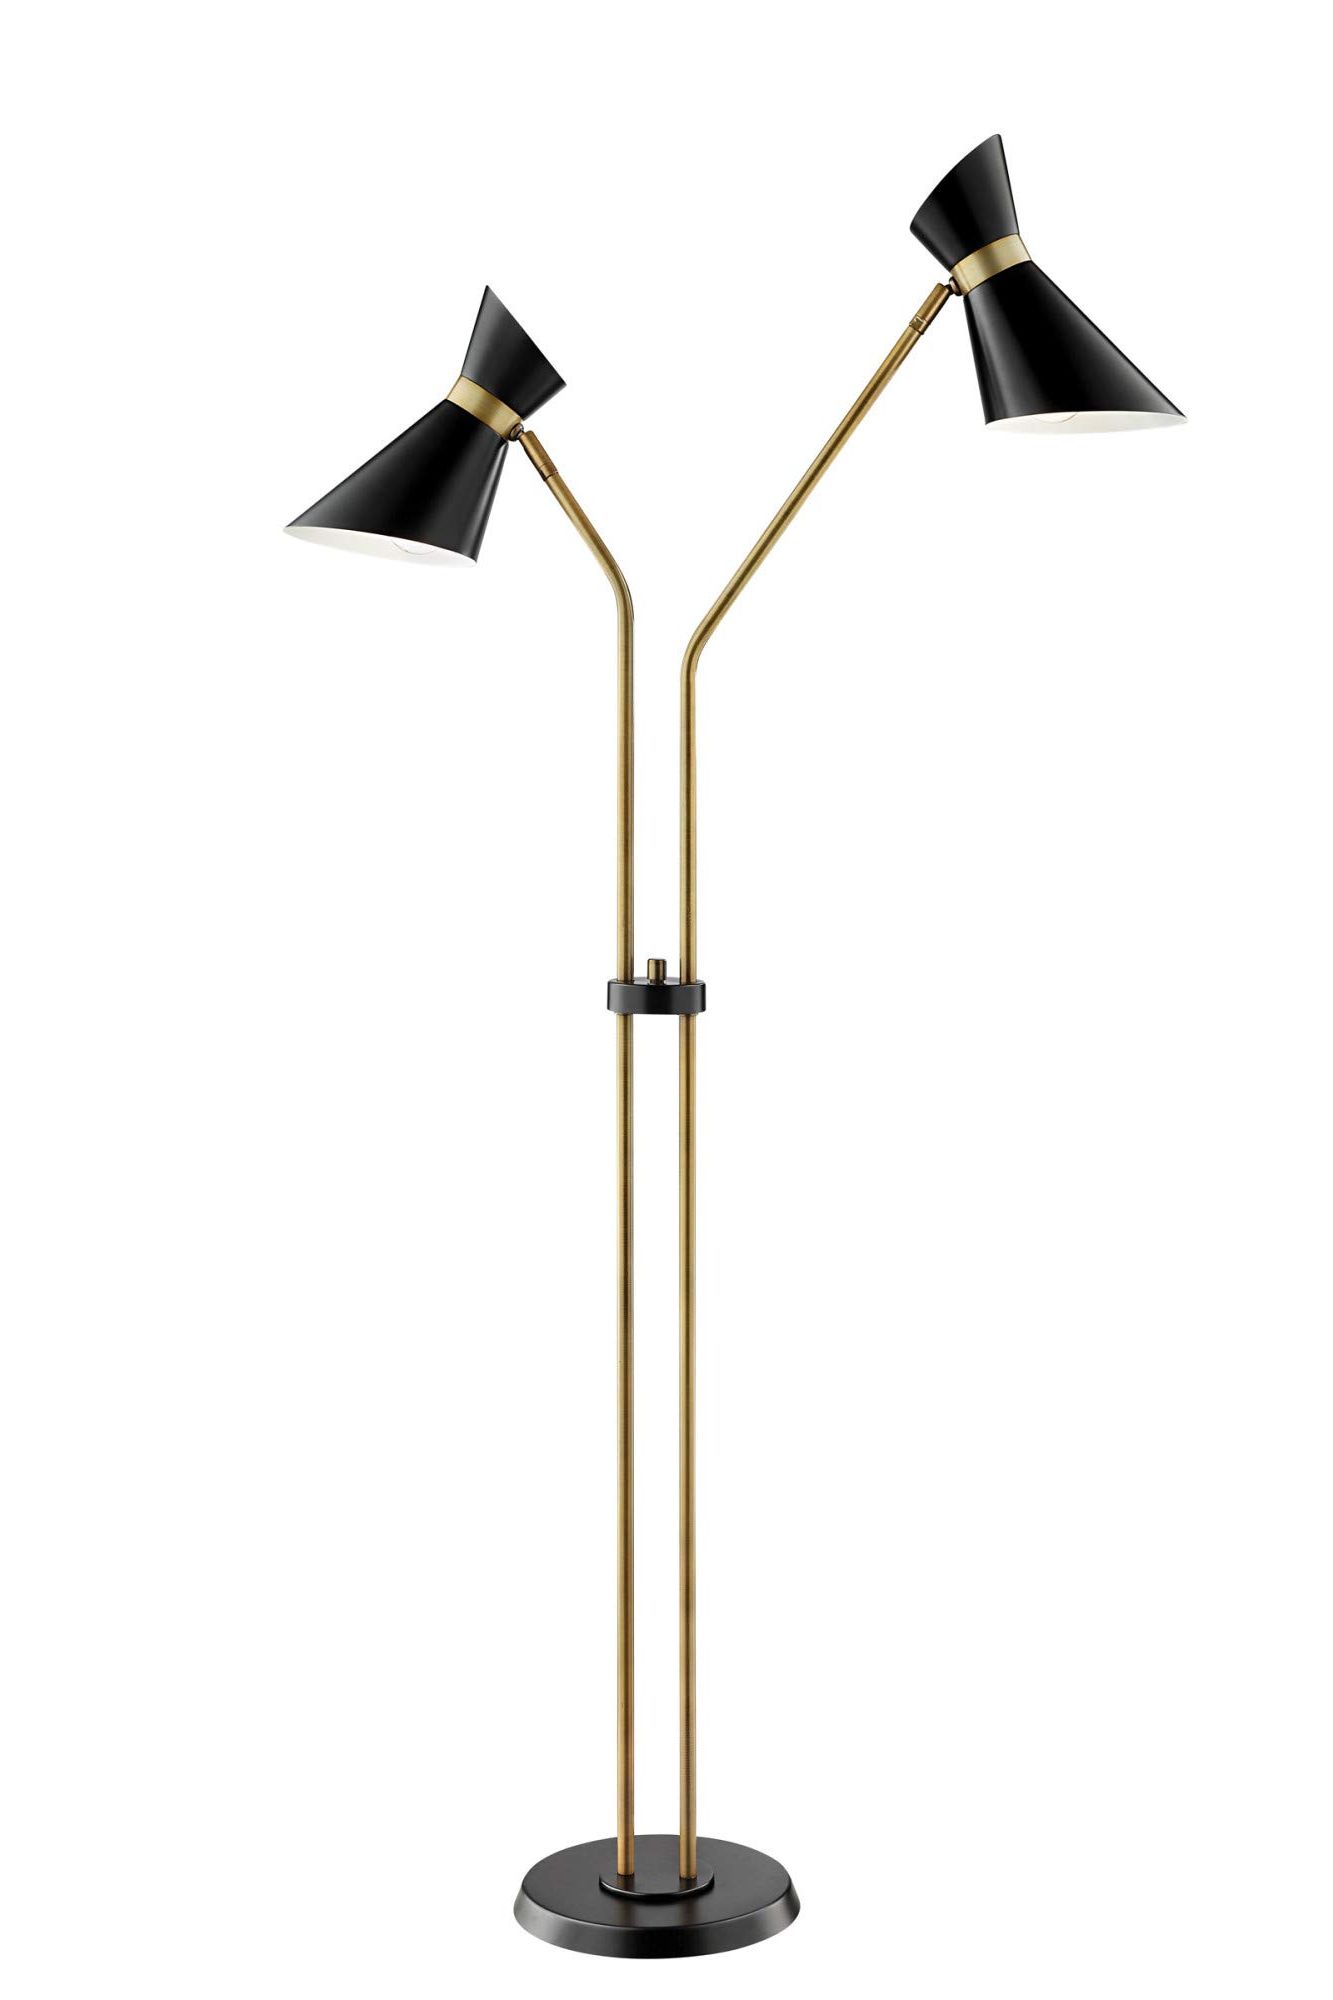 2 Arm Standing Lamps Pertaining To 2020 Amazon: Lite Source Jared Black And Antique Brass 2 Arm Floor Lamp :  Tools & Home Improvement (View 3 of 10)